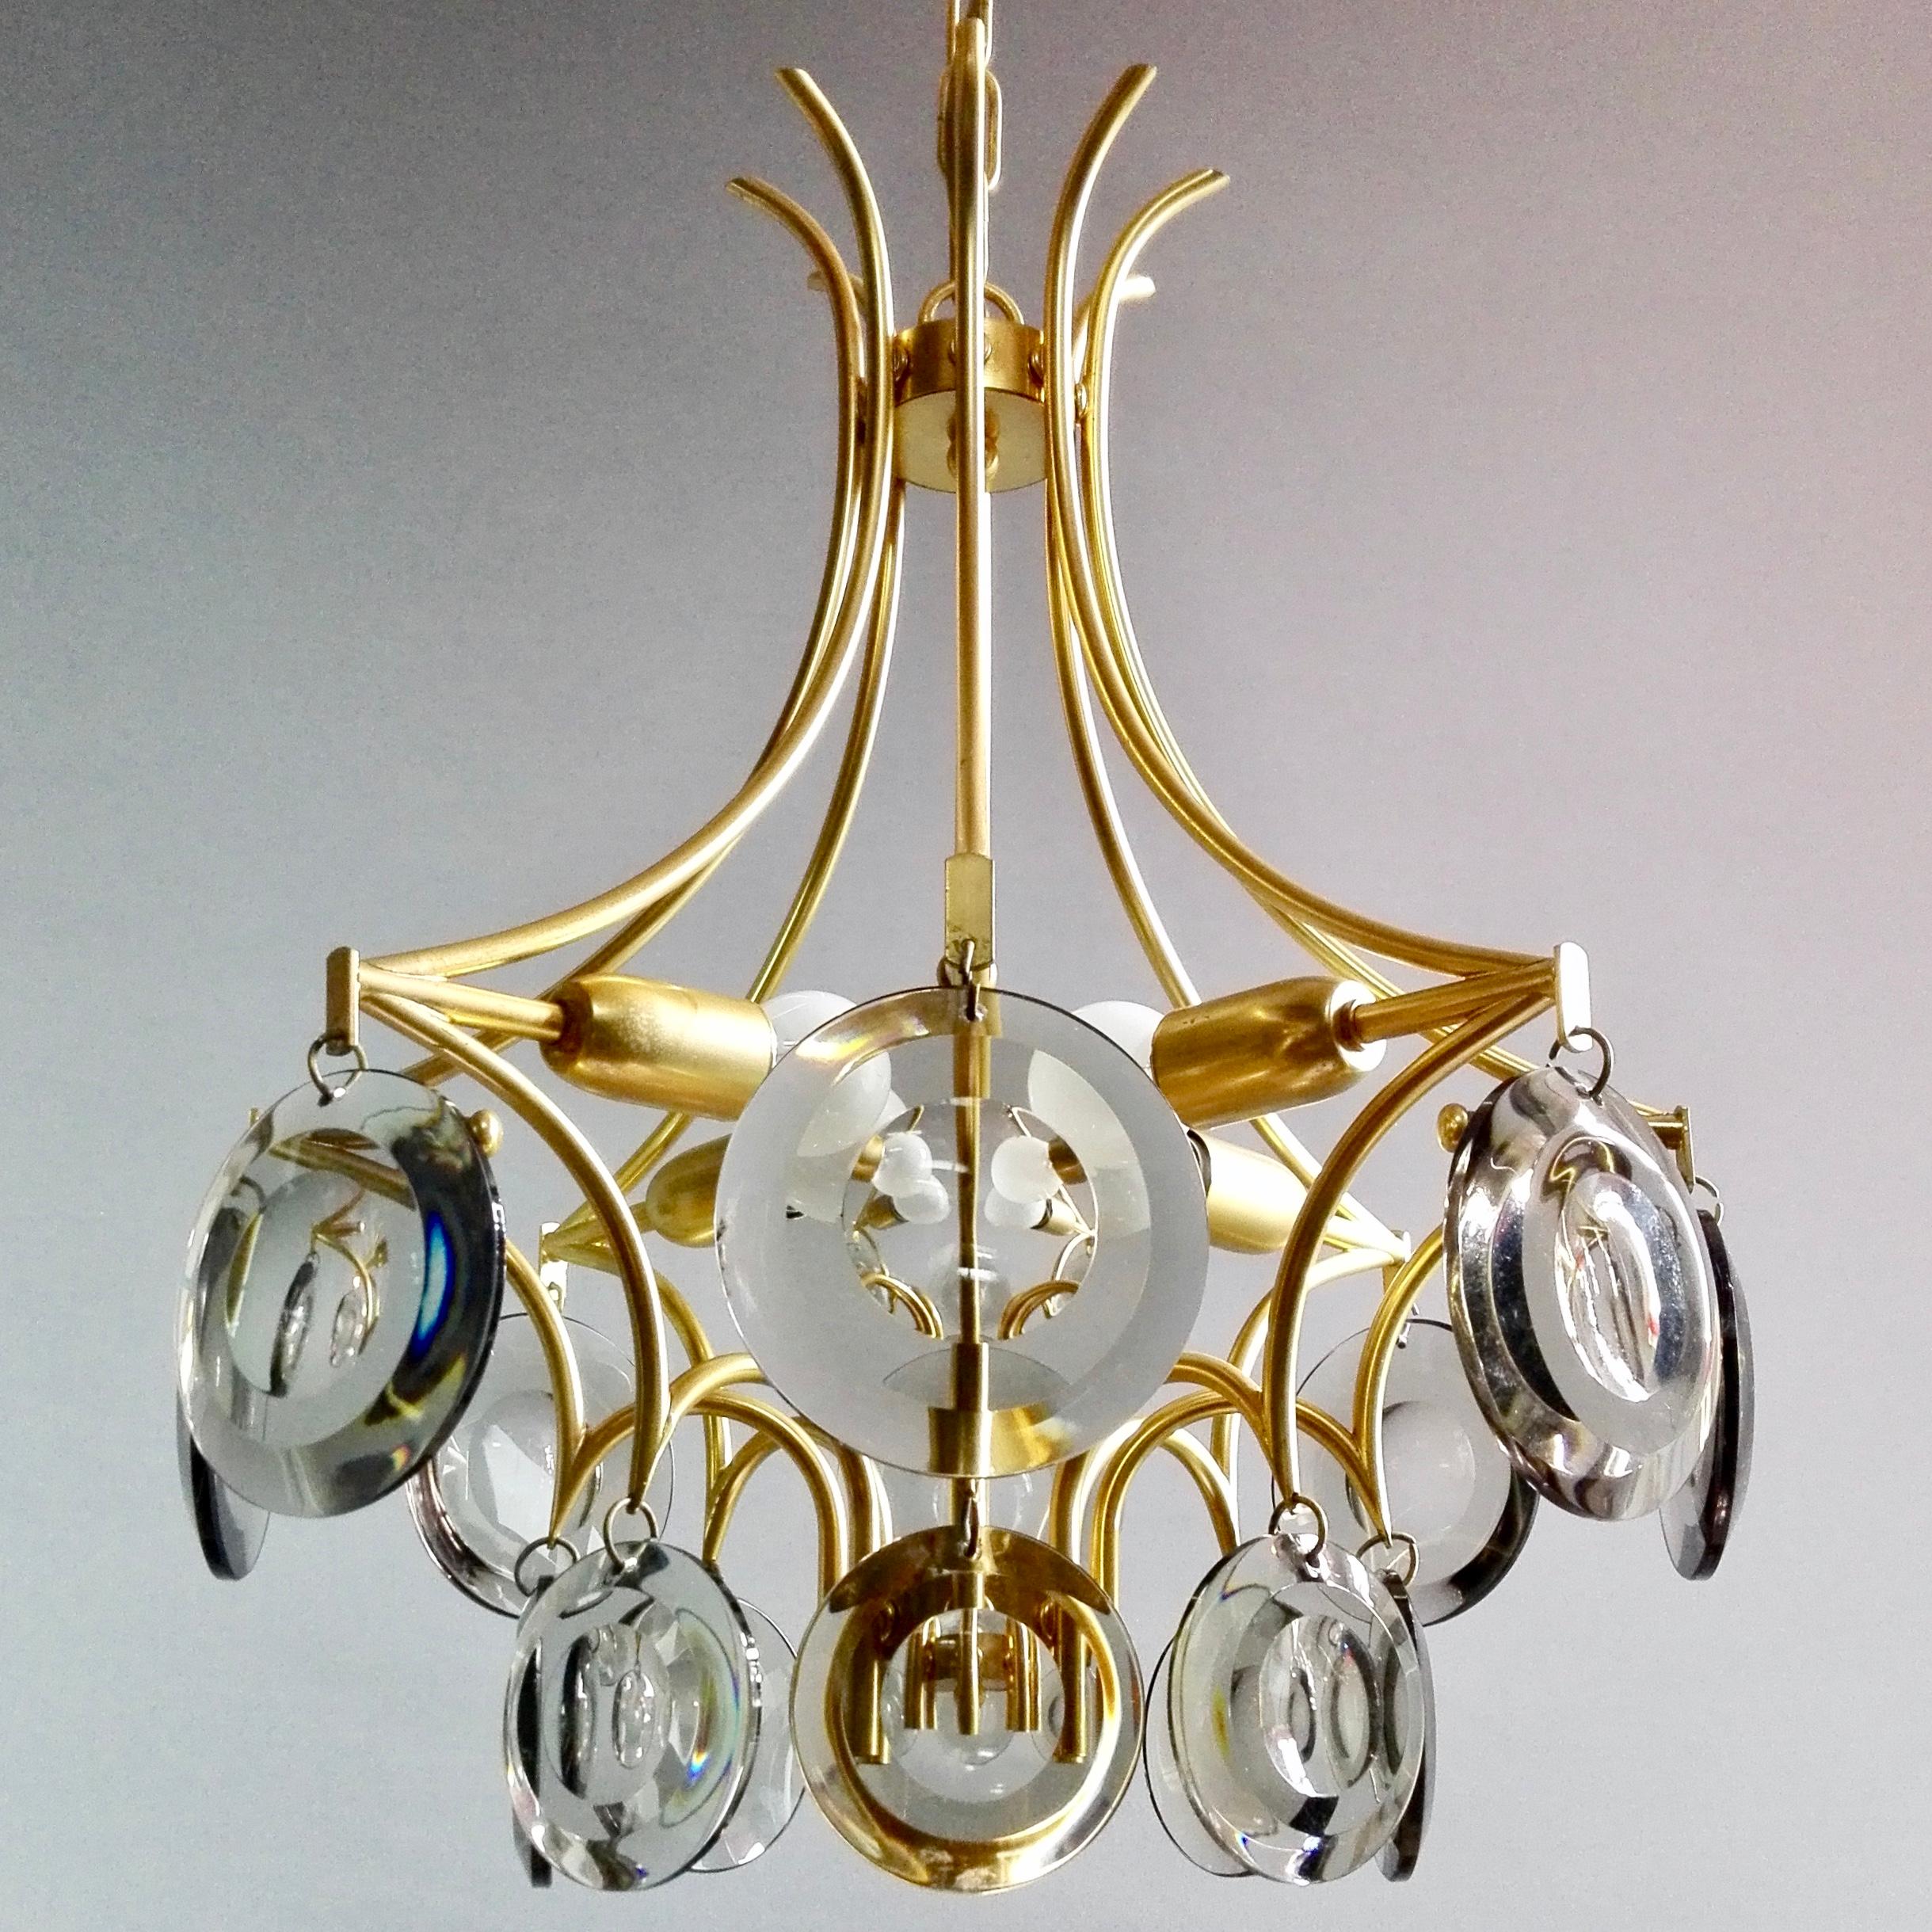 Faceted Vistosi Style 1970s Four-Light Gilded Chandelier. Smoked Optical Glass Discs.